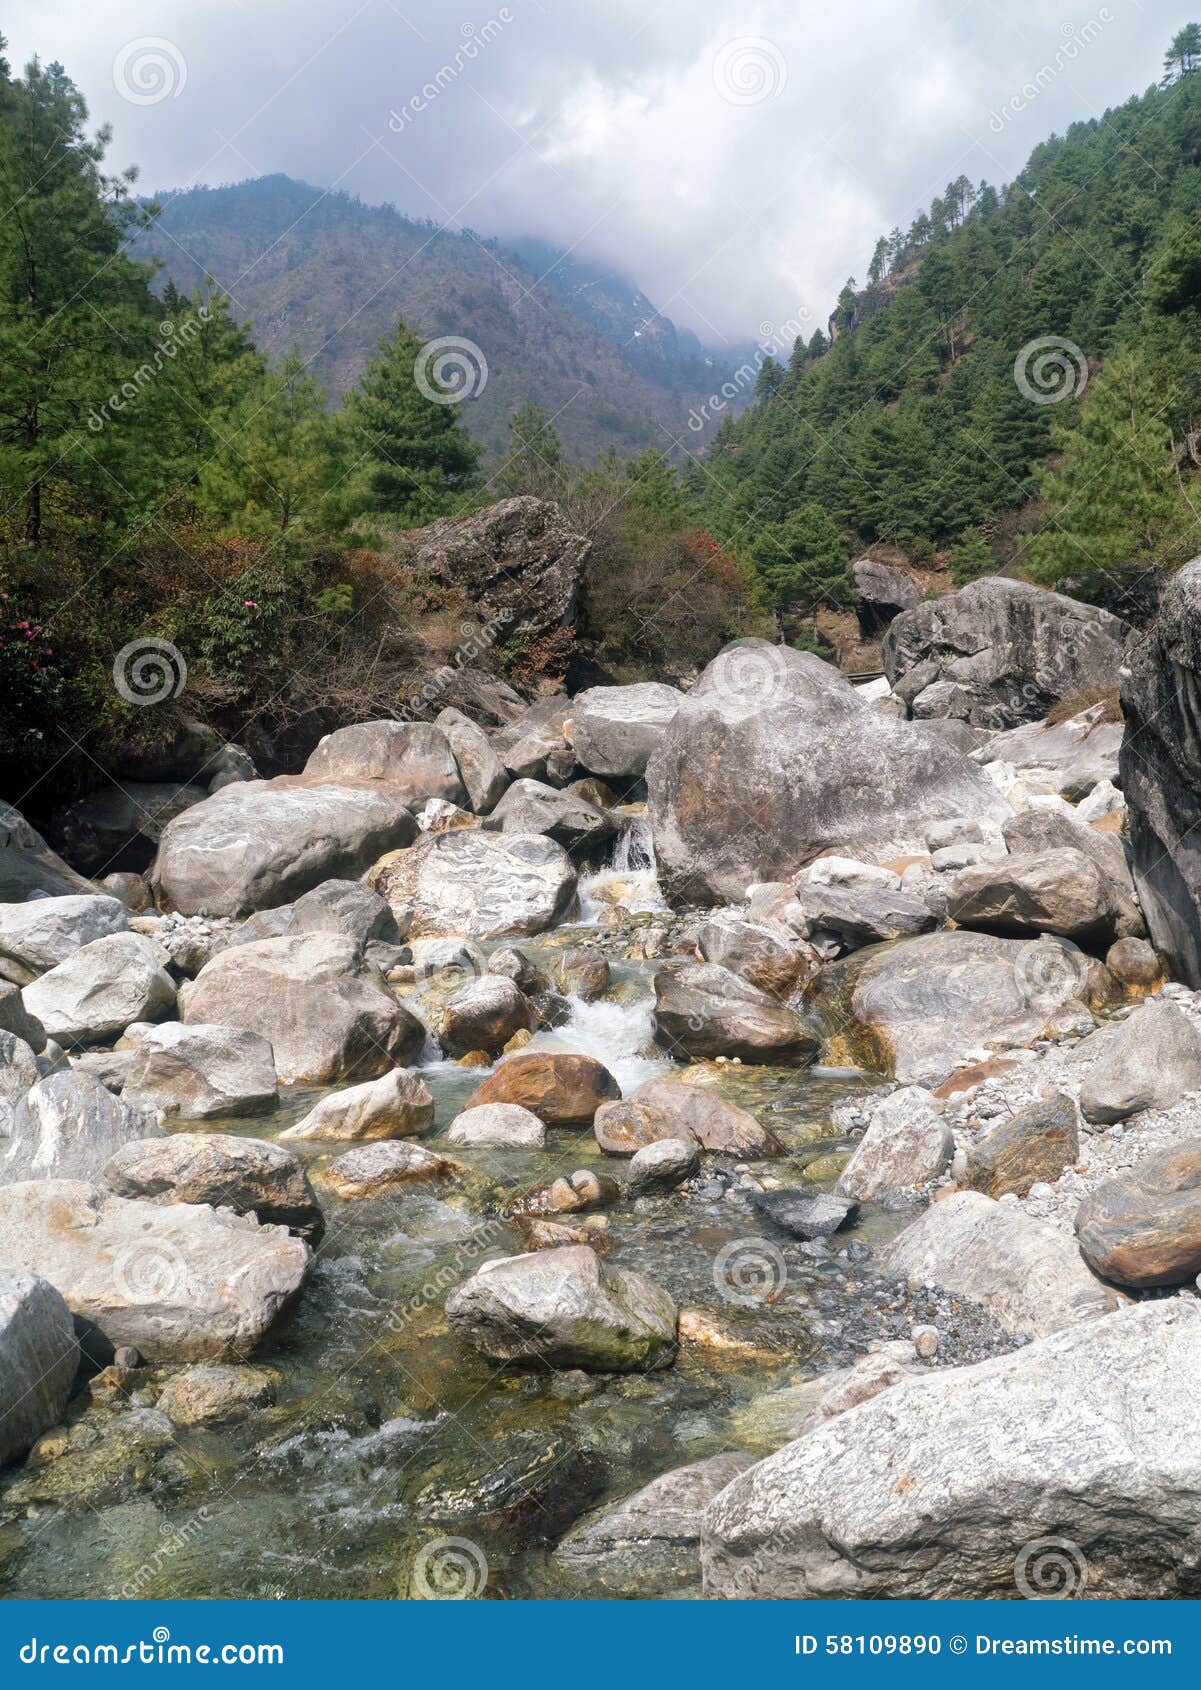 obstructed river in khumbu valley